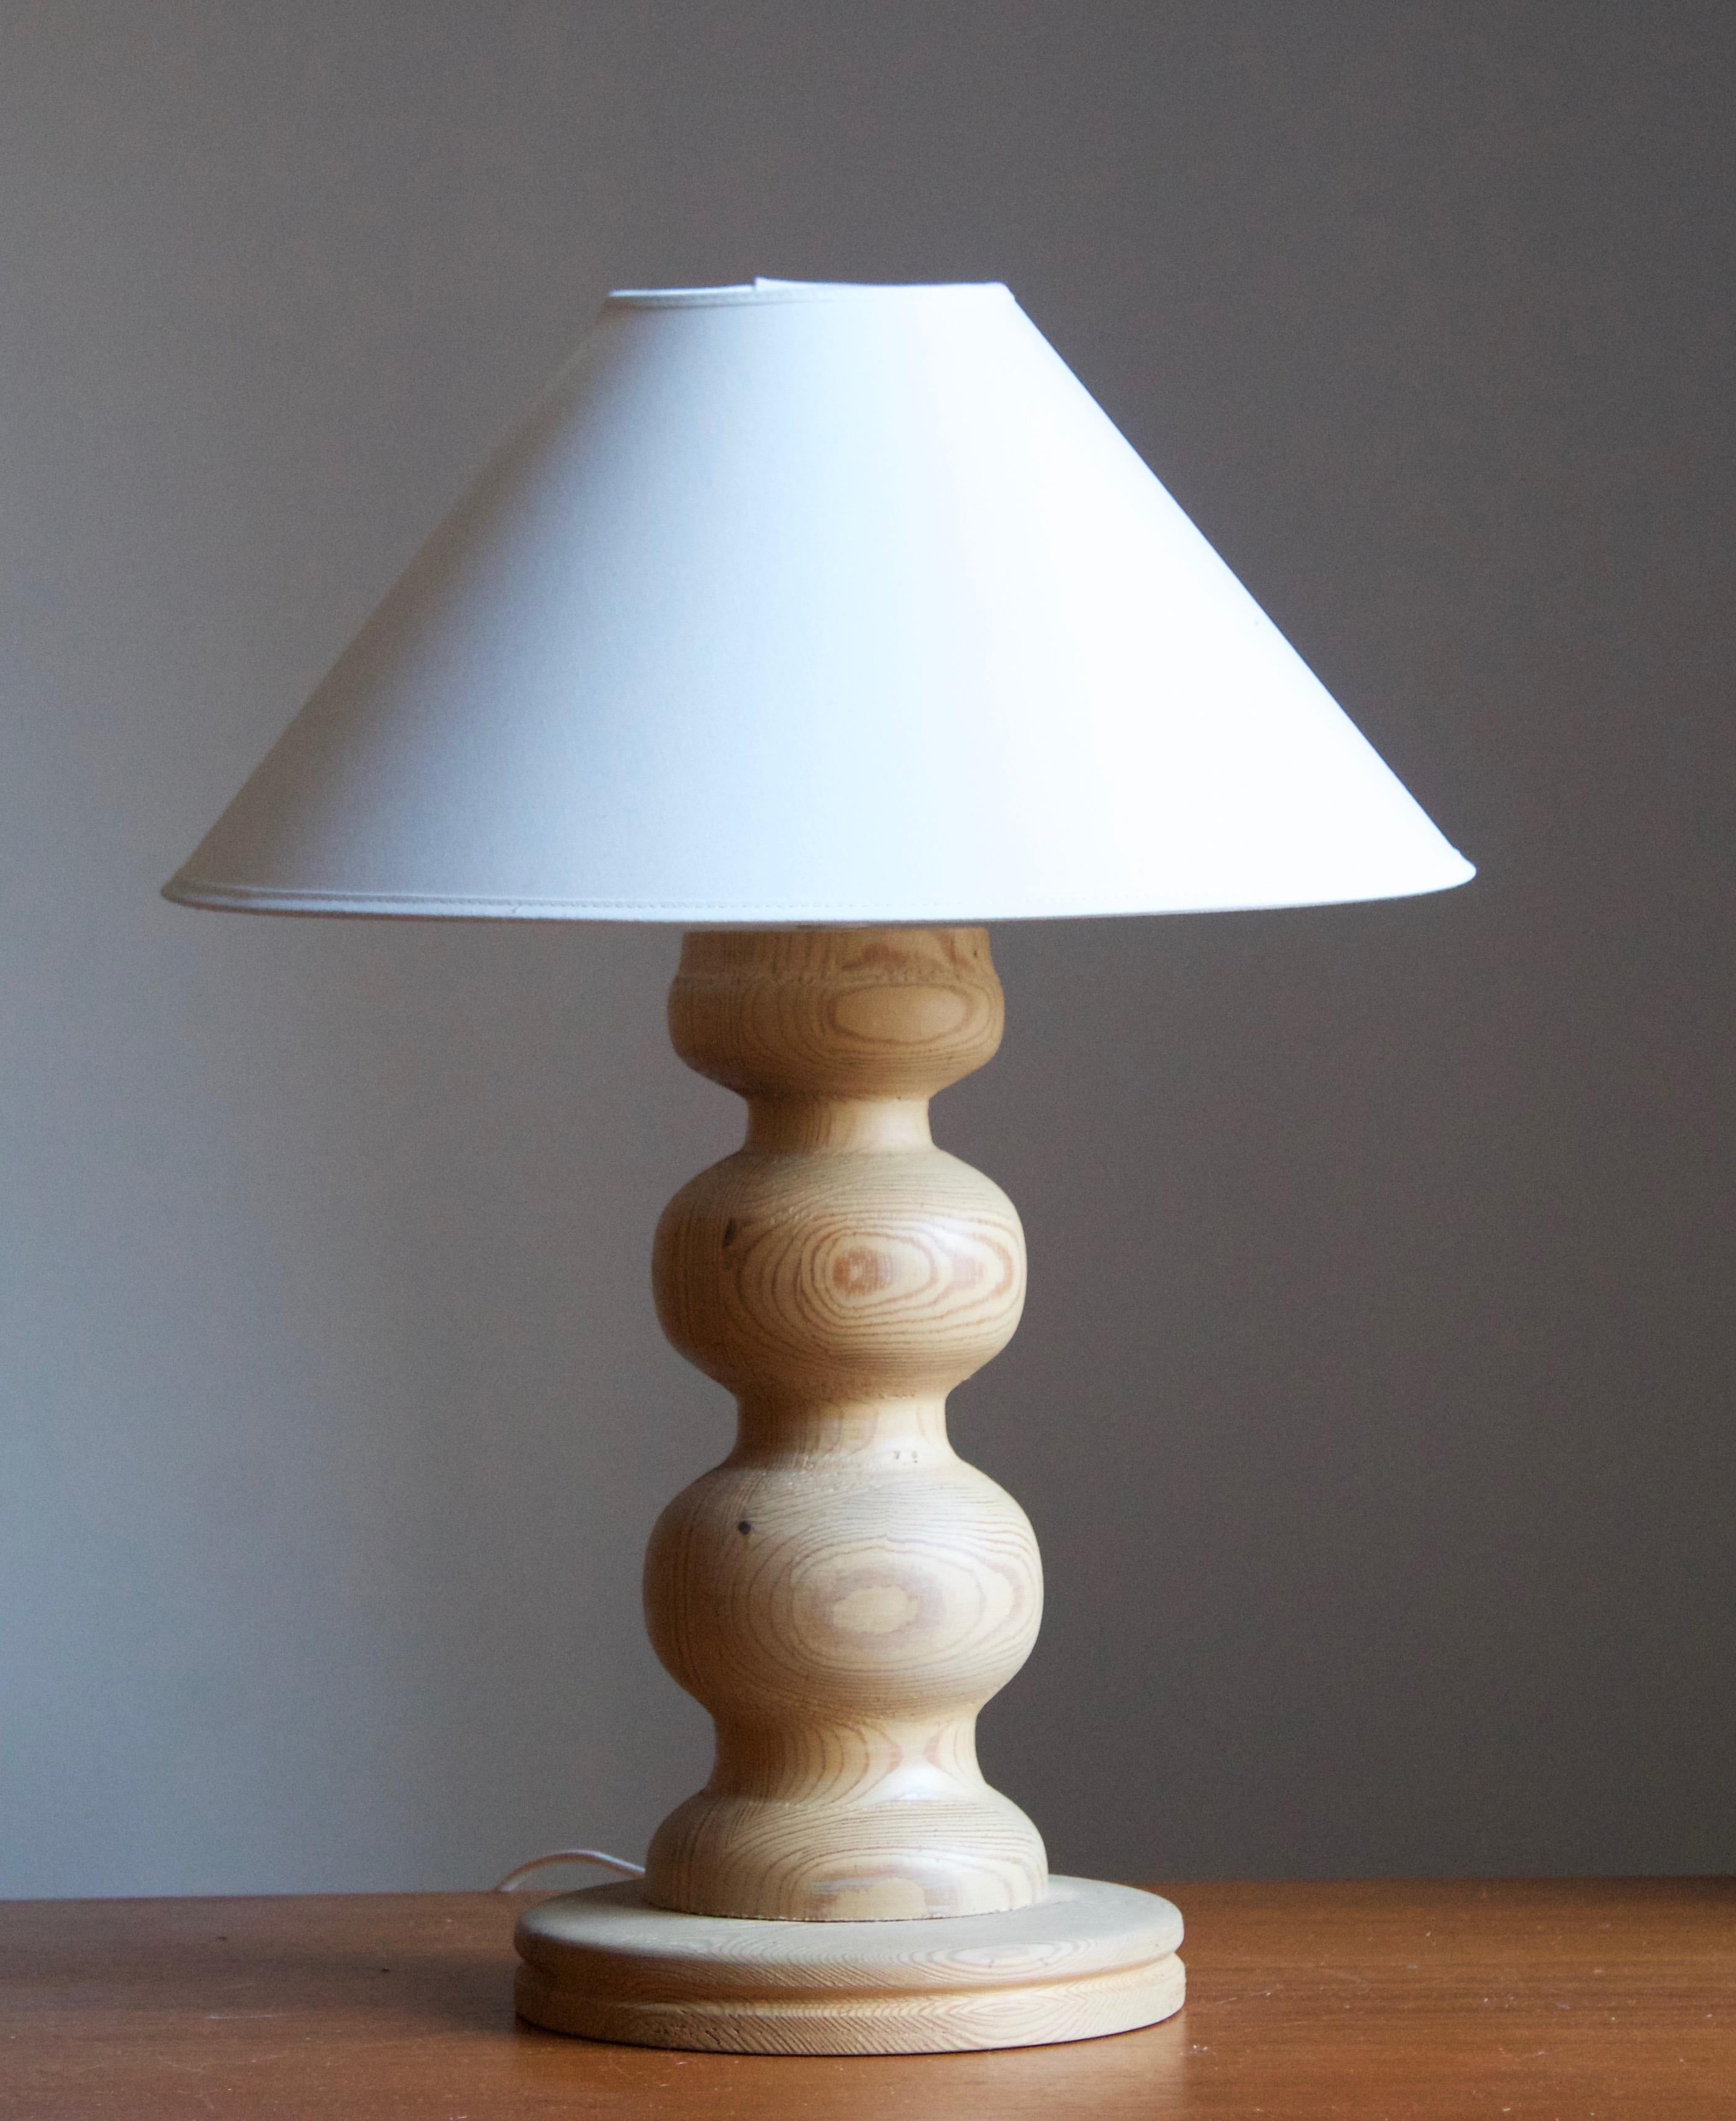 A sizable pine table lamp, designed and produced in Sweden, c. 1970s. 

Stated dimensions exclude lampshade. Height includes socket. Sold without lampshade.